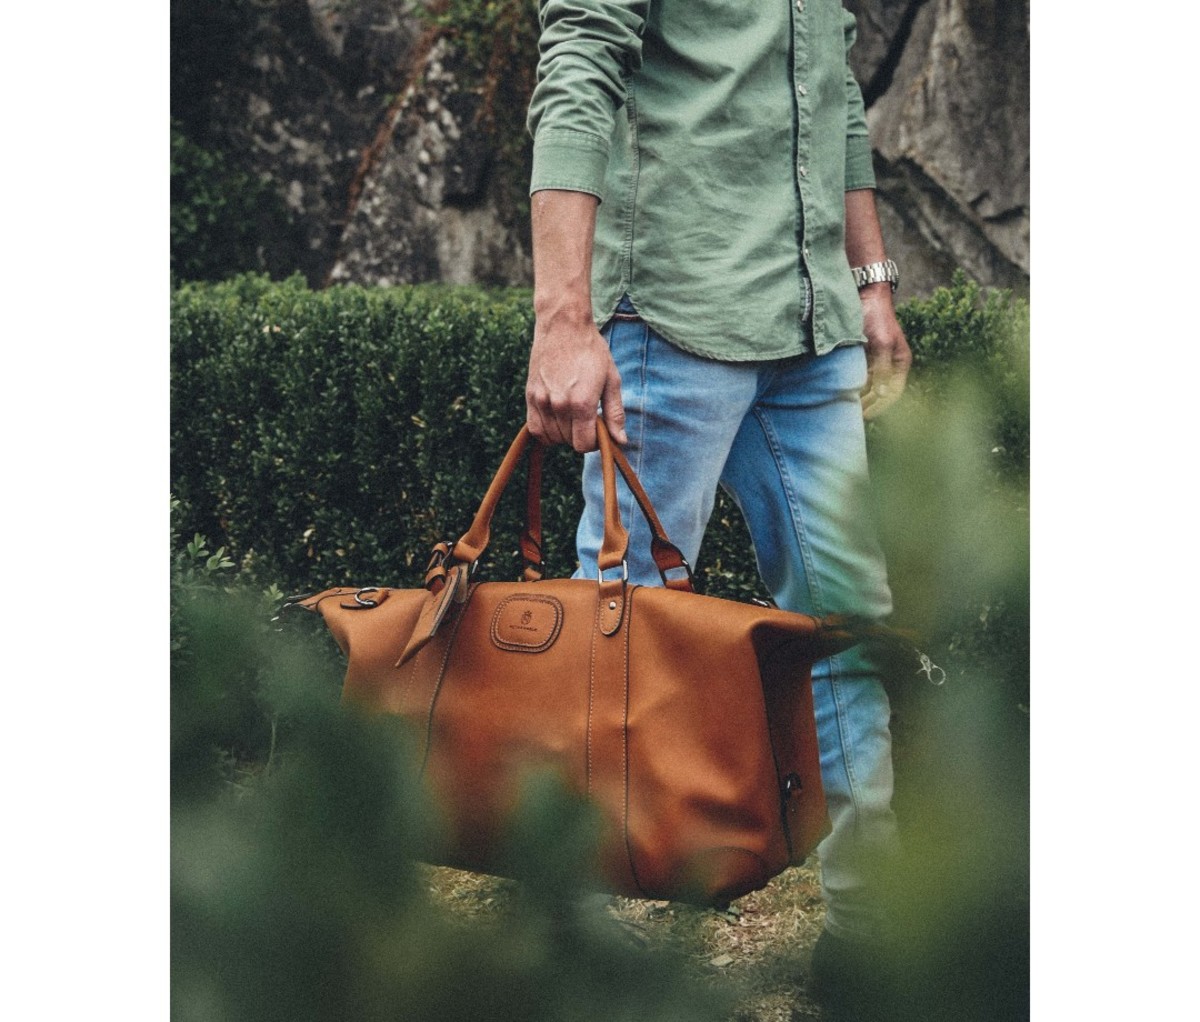 Man in green button-down and jeans holding tan leather duffel bag